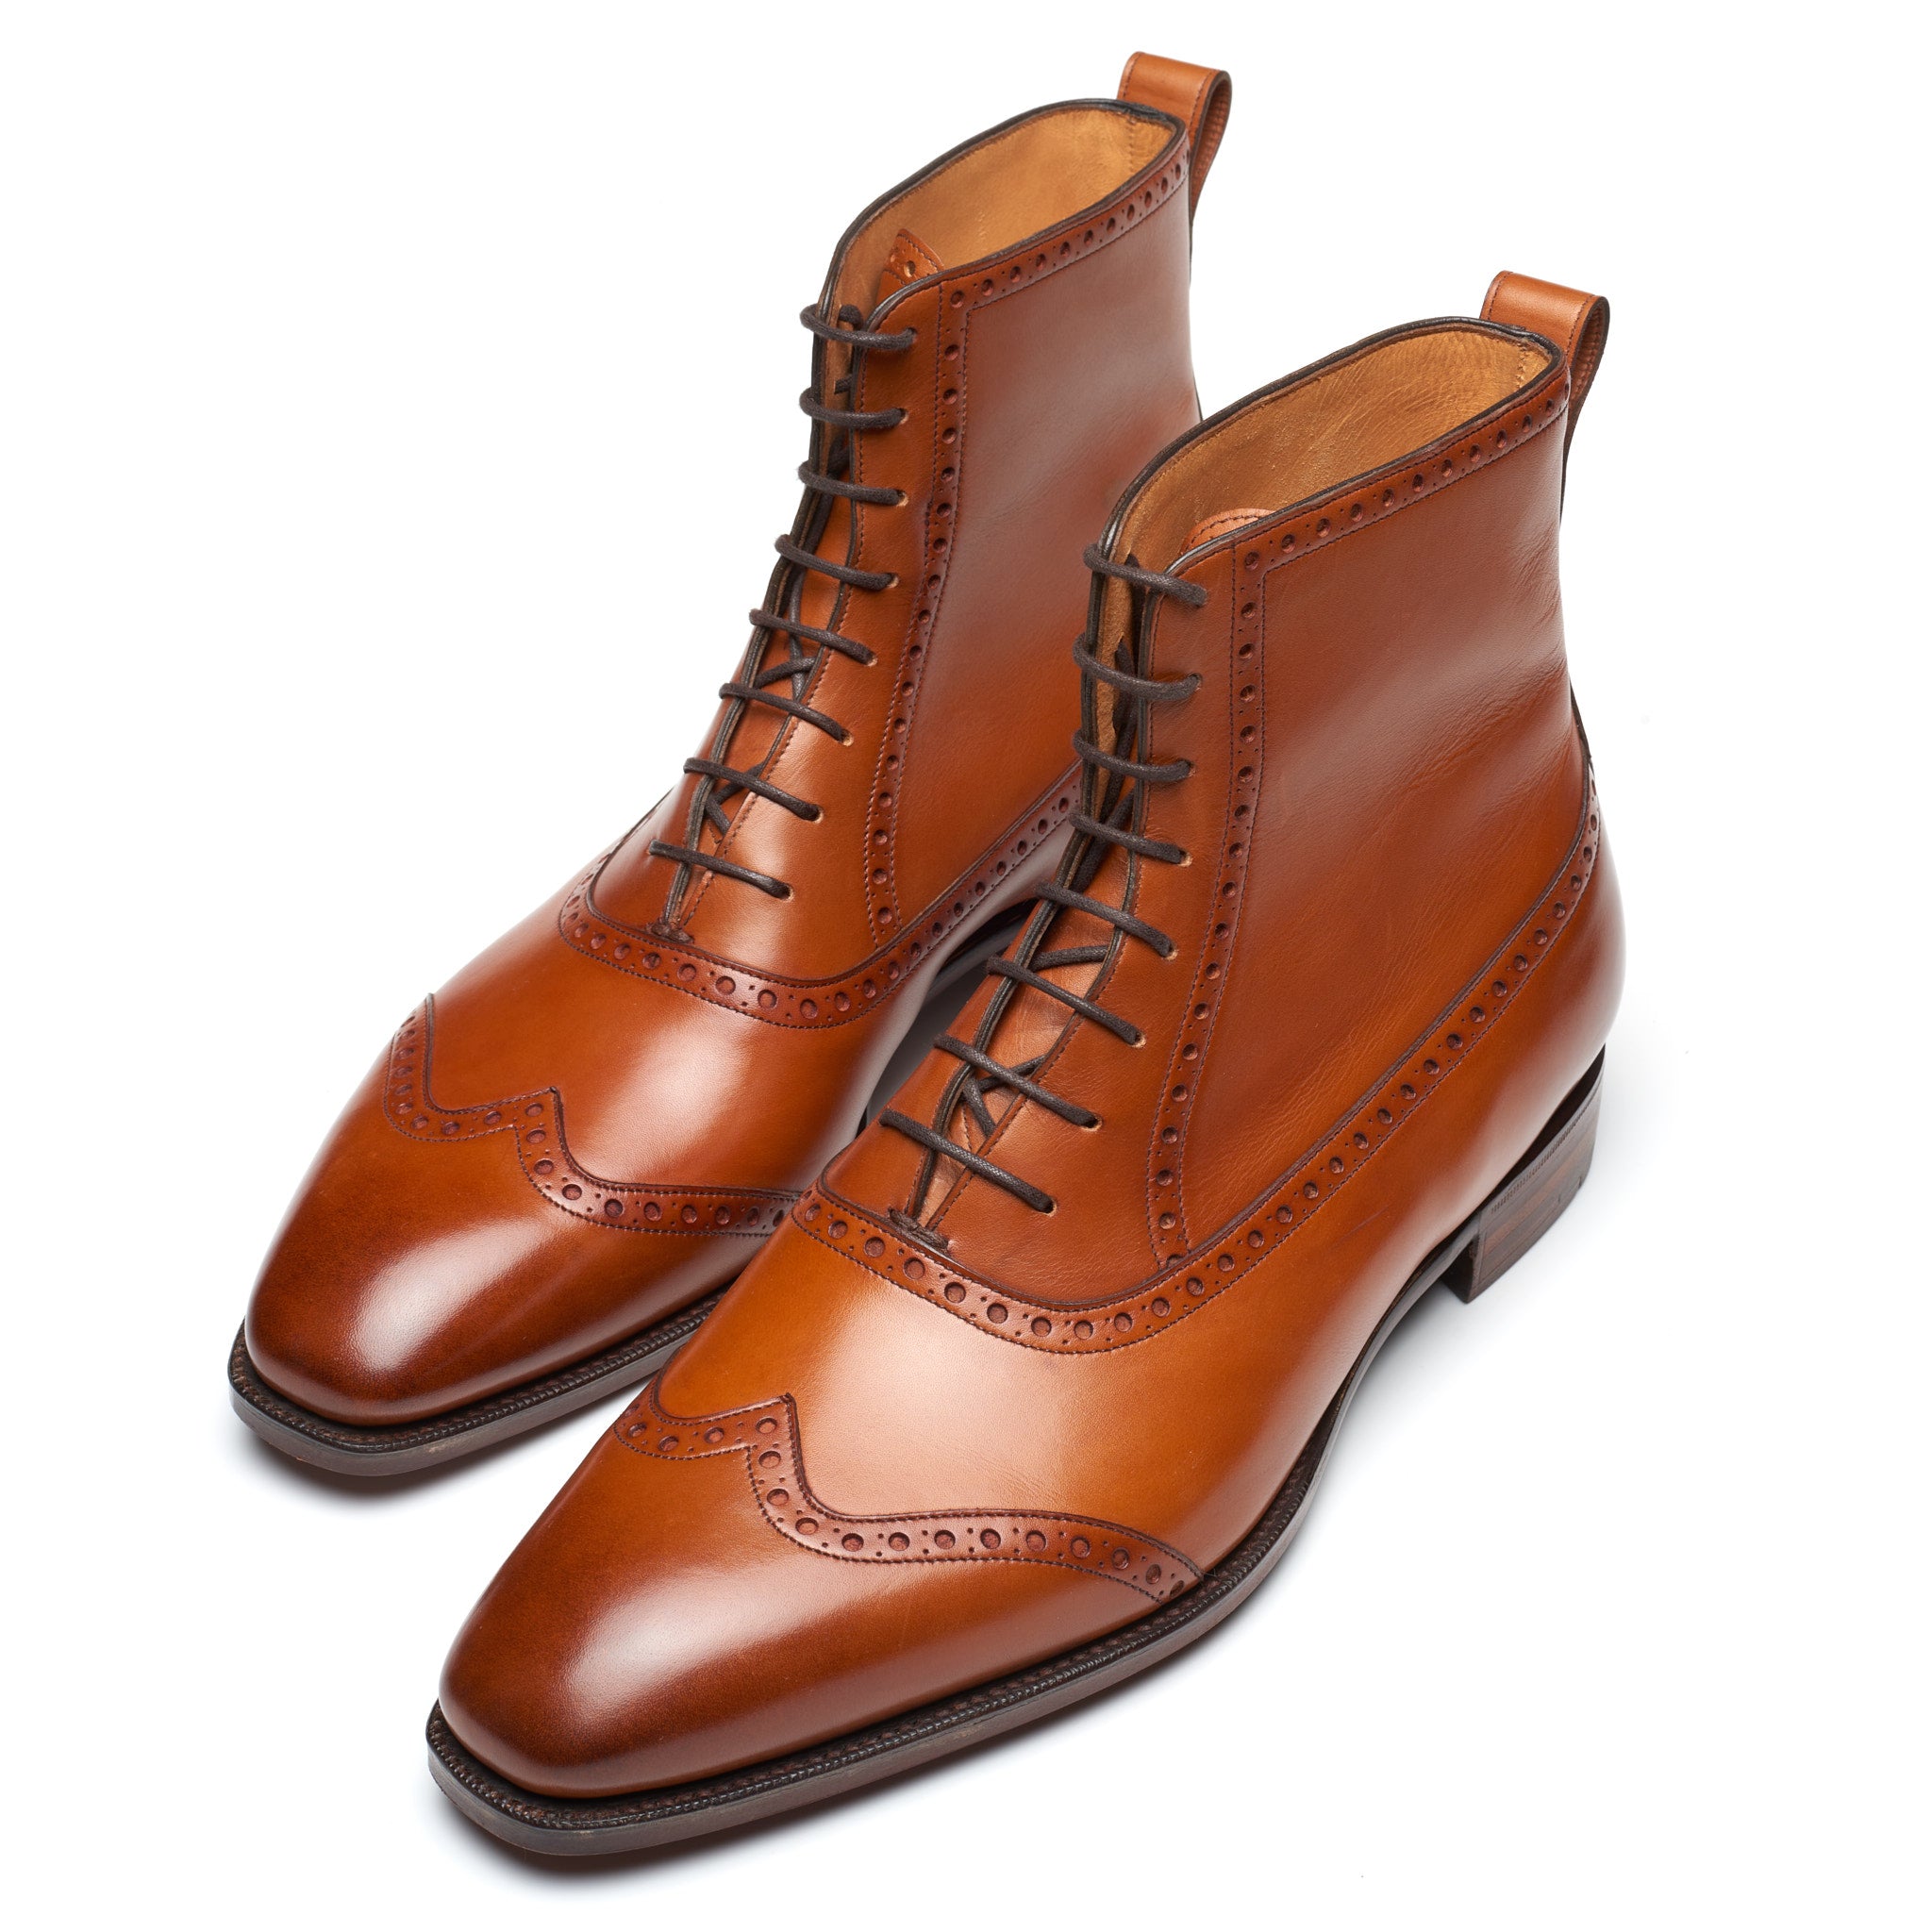 GAZIANO & GIRLING "Lamport" Chestnut Leather Boots UK 8E NEW US 8.5 Last MH71 GAZIANO & GIRLING